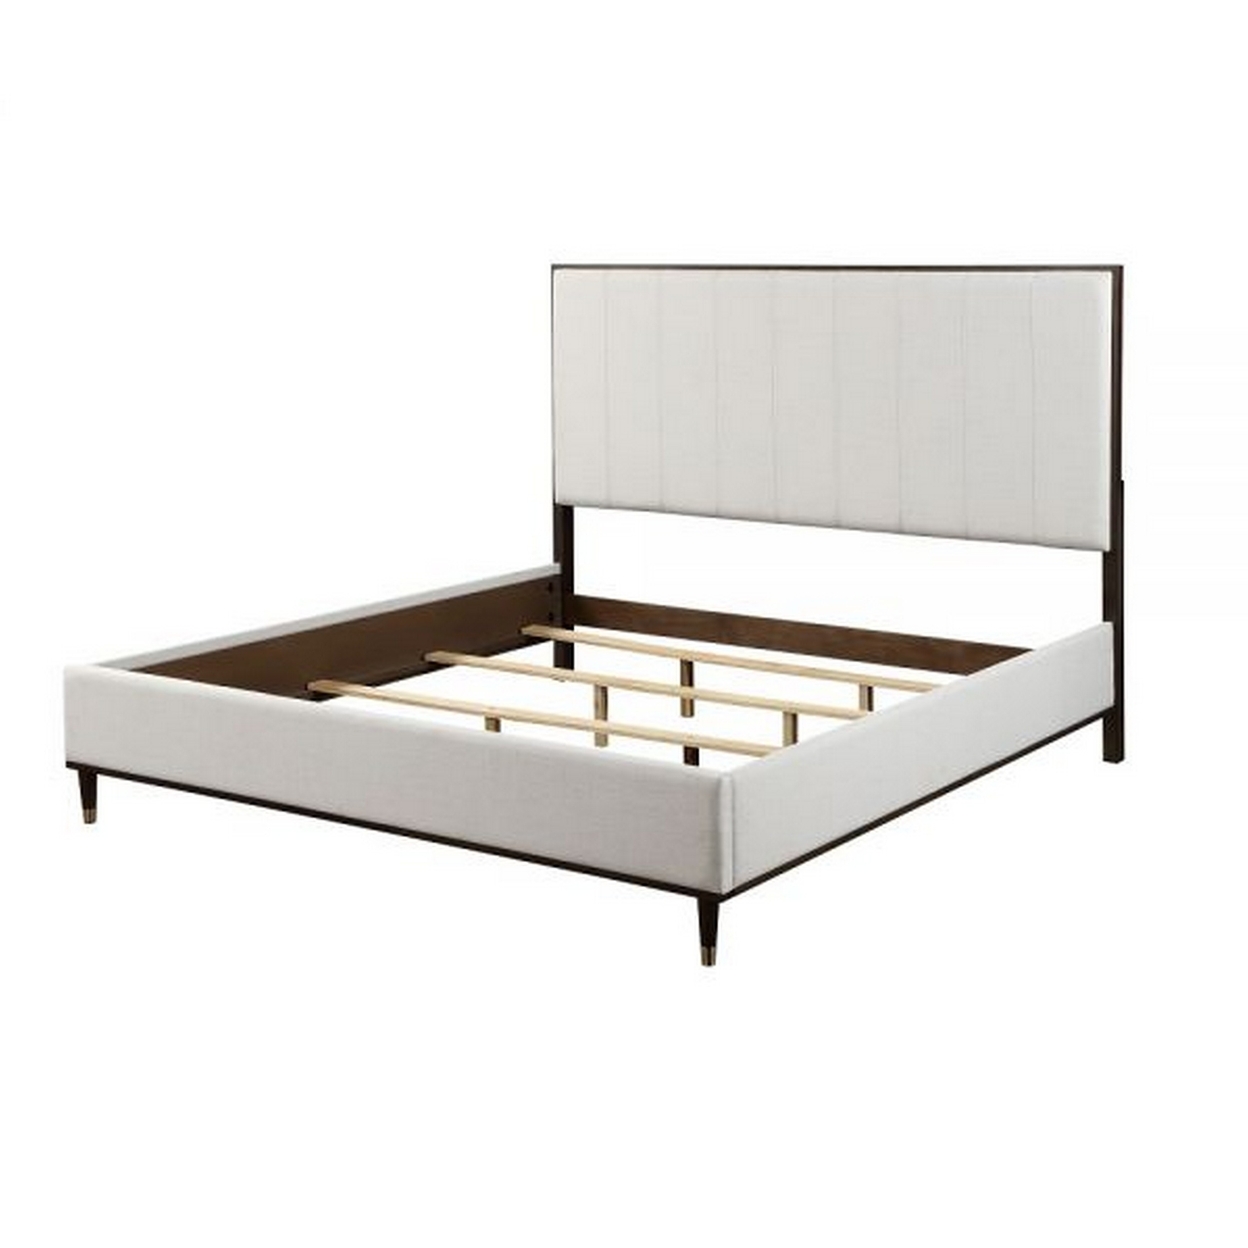 Aren Queen Bed, Light Gray Fabric Upholstery, Crisp White And Smooth Brown -Saltoro Sherpi